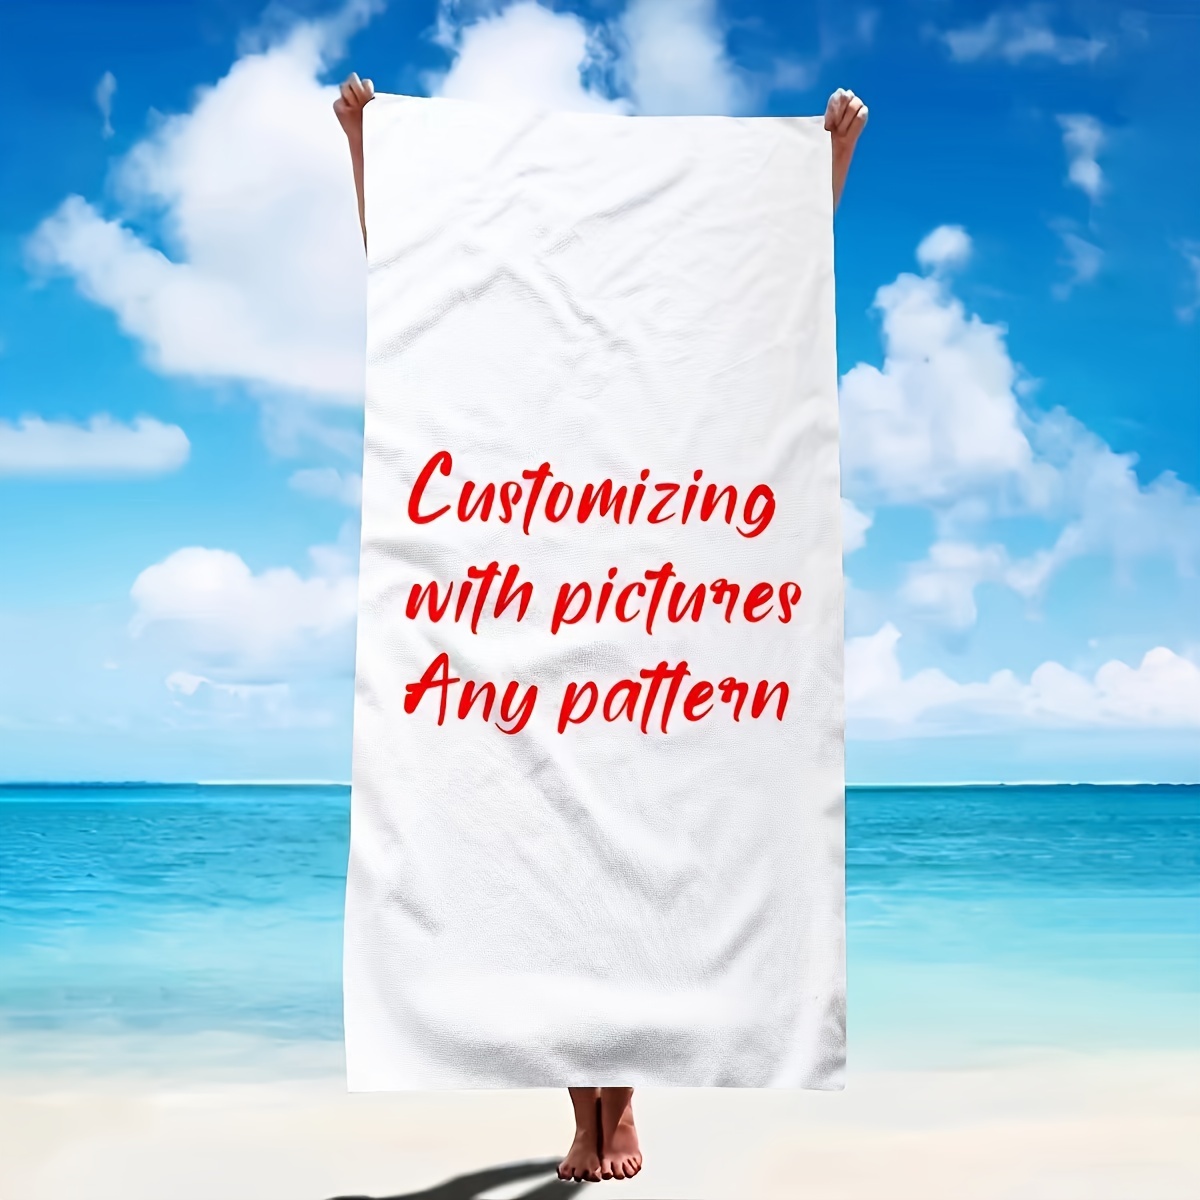 

Customize Your Own Design, Ultra-fine Fiber Rectangular Beach Towel With Quick-drying Feature, Personalized With Your Own Pictures